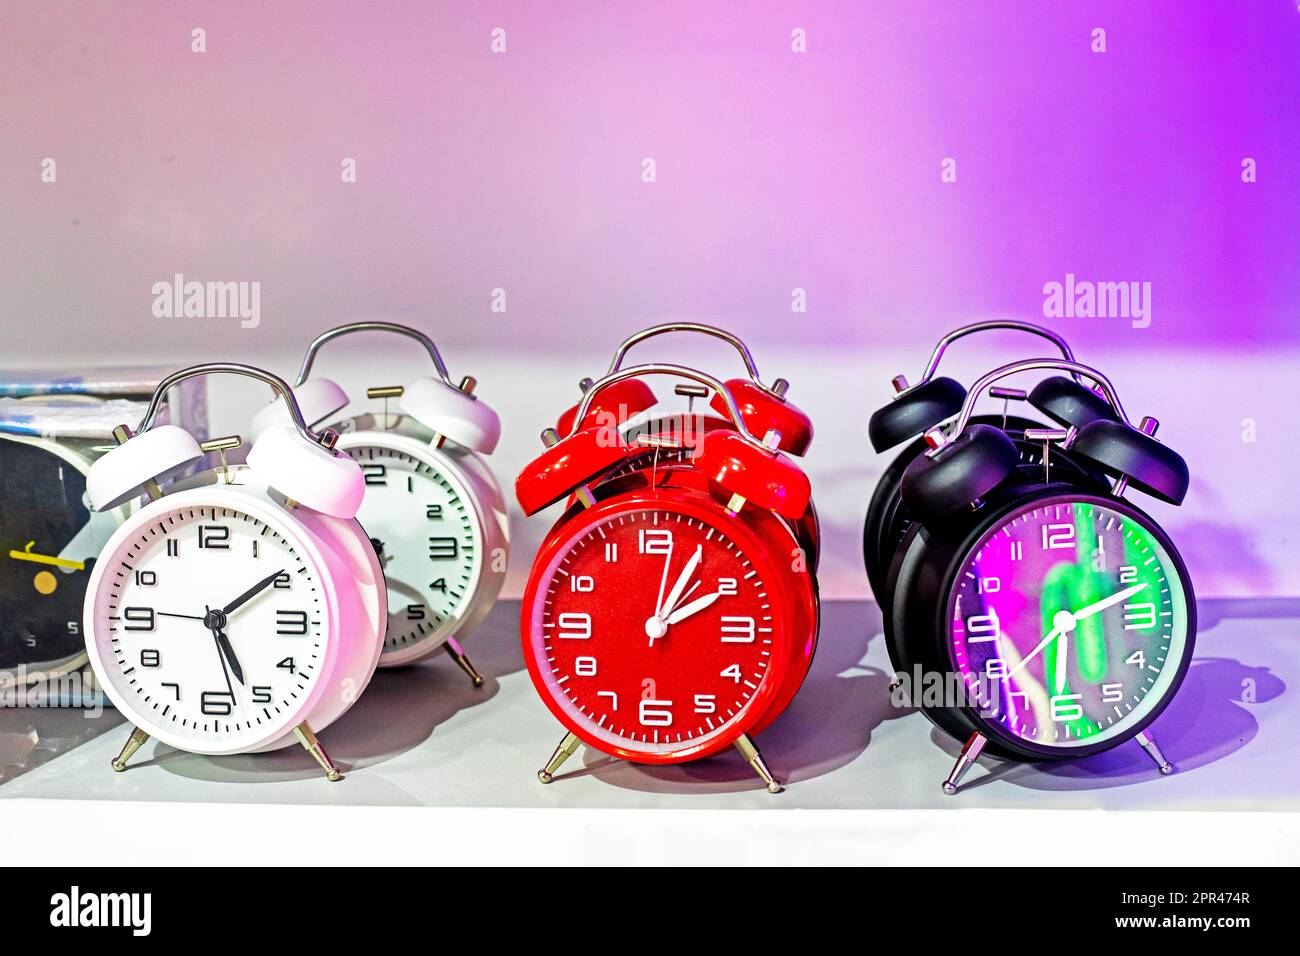 alarm clocks watch white red and black lights in bright pink lighting. Change time to summer or winter Stock Photo